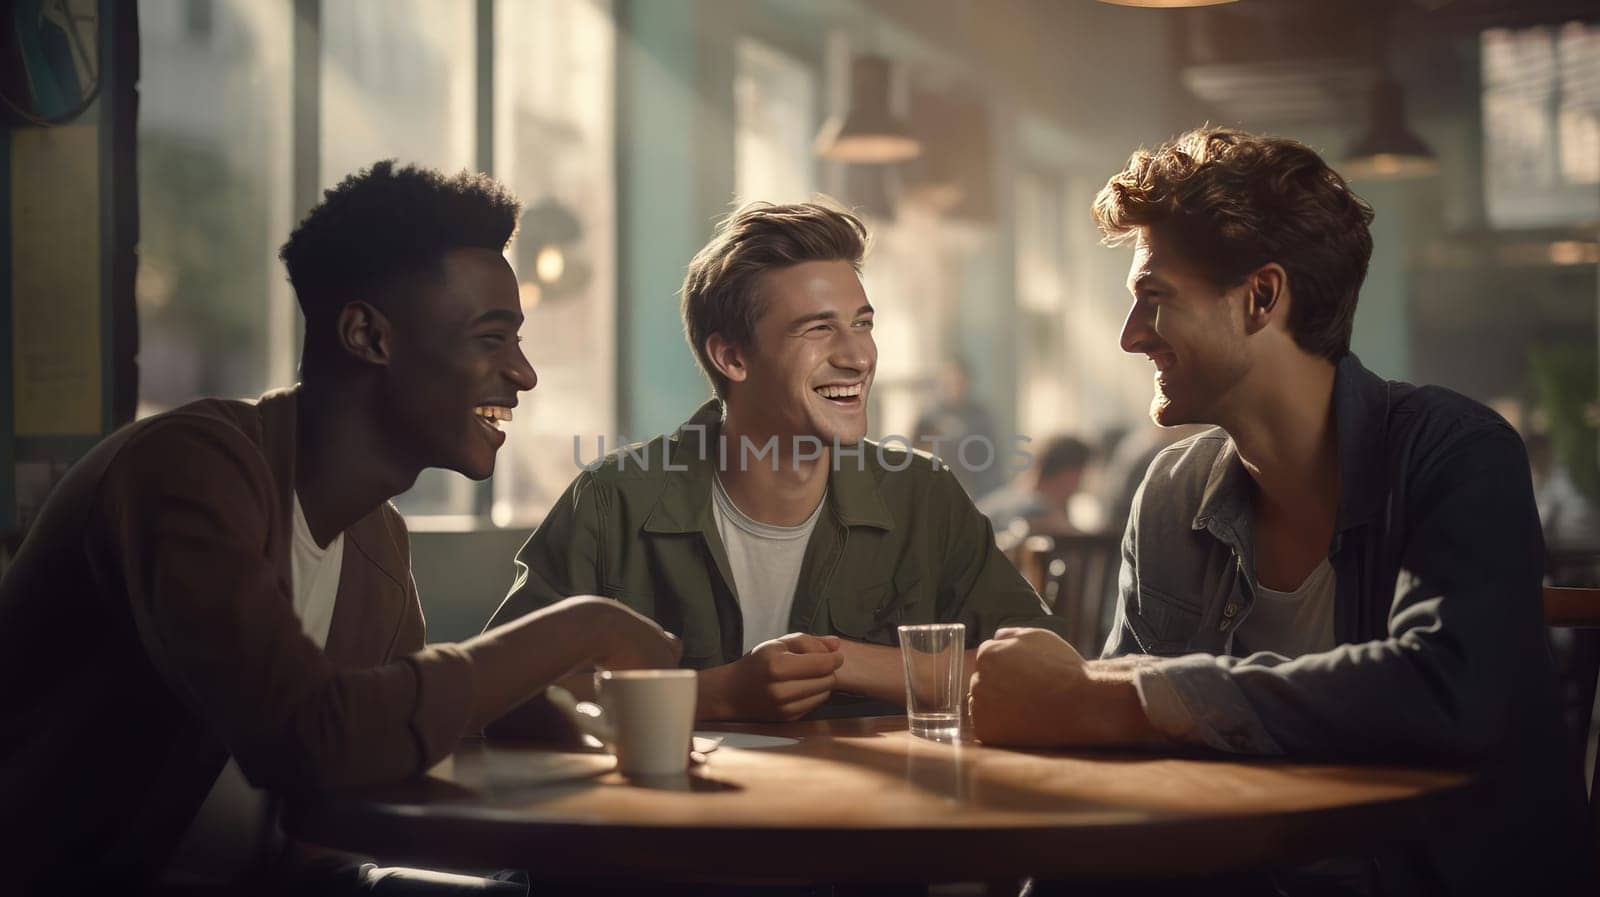 Three friends are chatting in a cafe. Smiling at each other